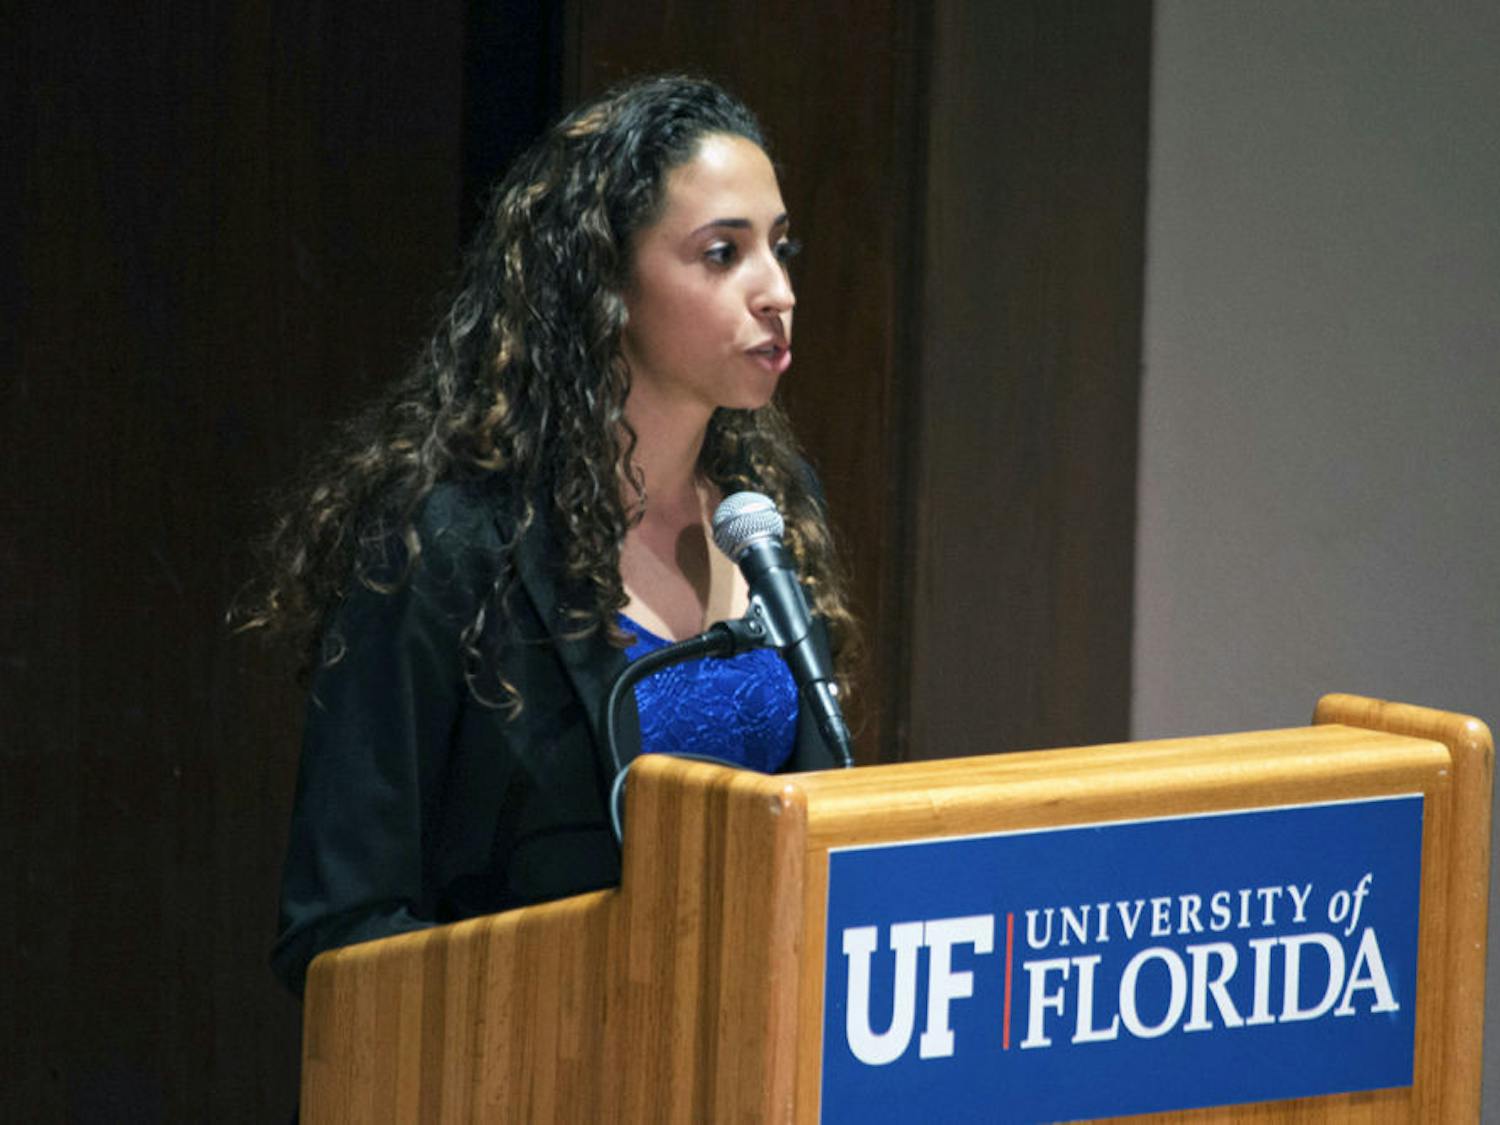 Joselin Padron-Rasines, a political science and international studies junior, presents the Access Party opening statement for the University of Florida Student Government Executive Debate on Tuesday in the University Auditorium. Padron-Rasines is running as presidential candidate.